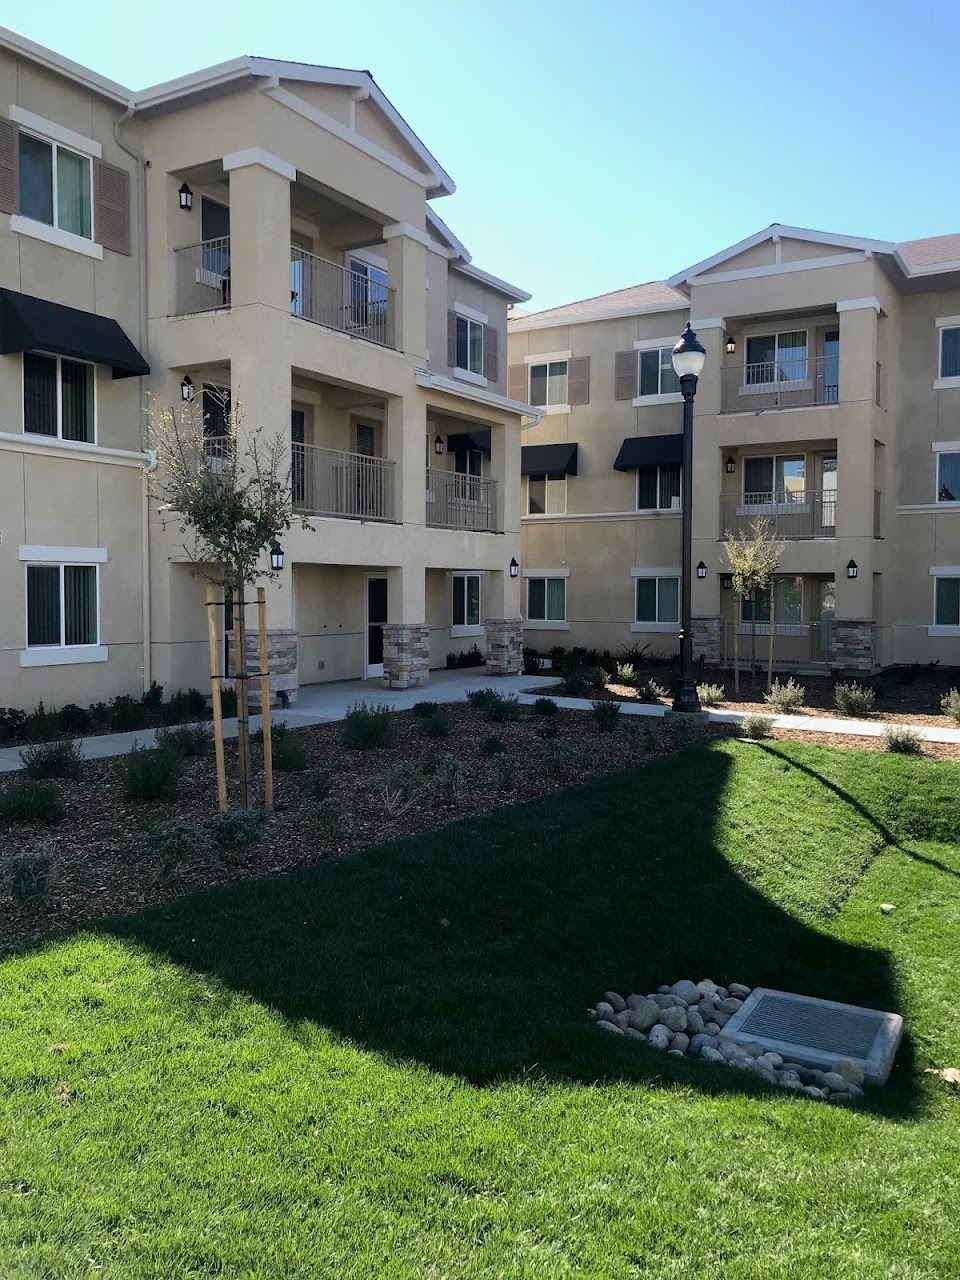 Photo of OAK CREEK FAMILY APARTMENTS. Affordable housing located at 51 CAROL LANE OAKLEY, CA 94561